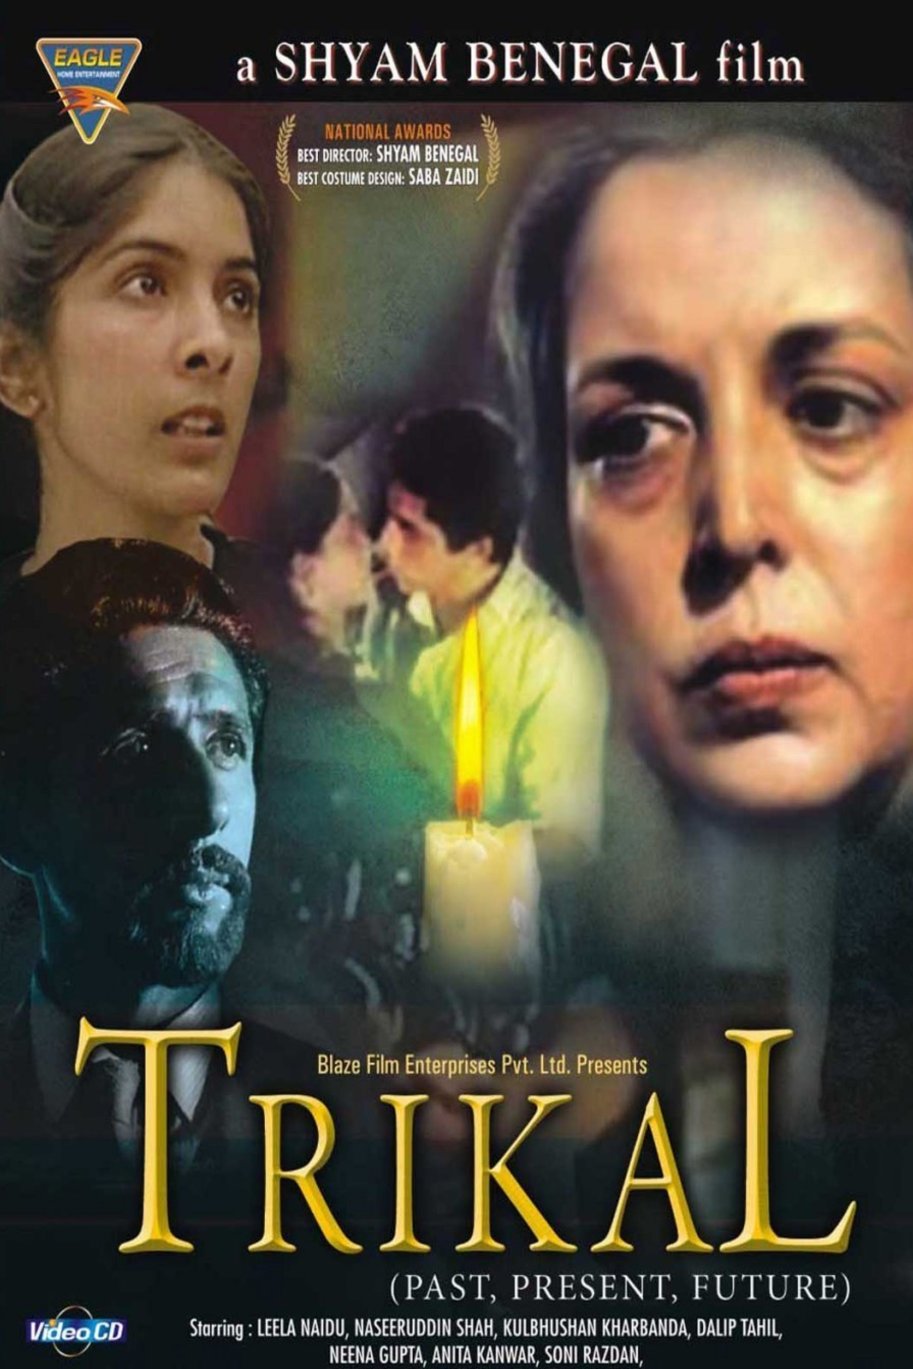 Hindi poster of the movie Trikal Past, Present, Future